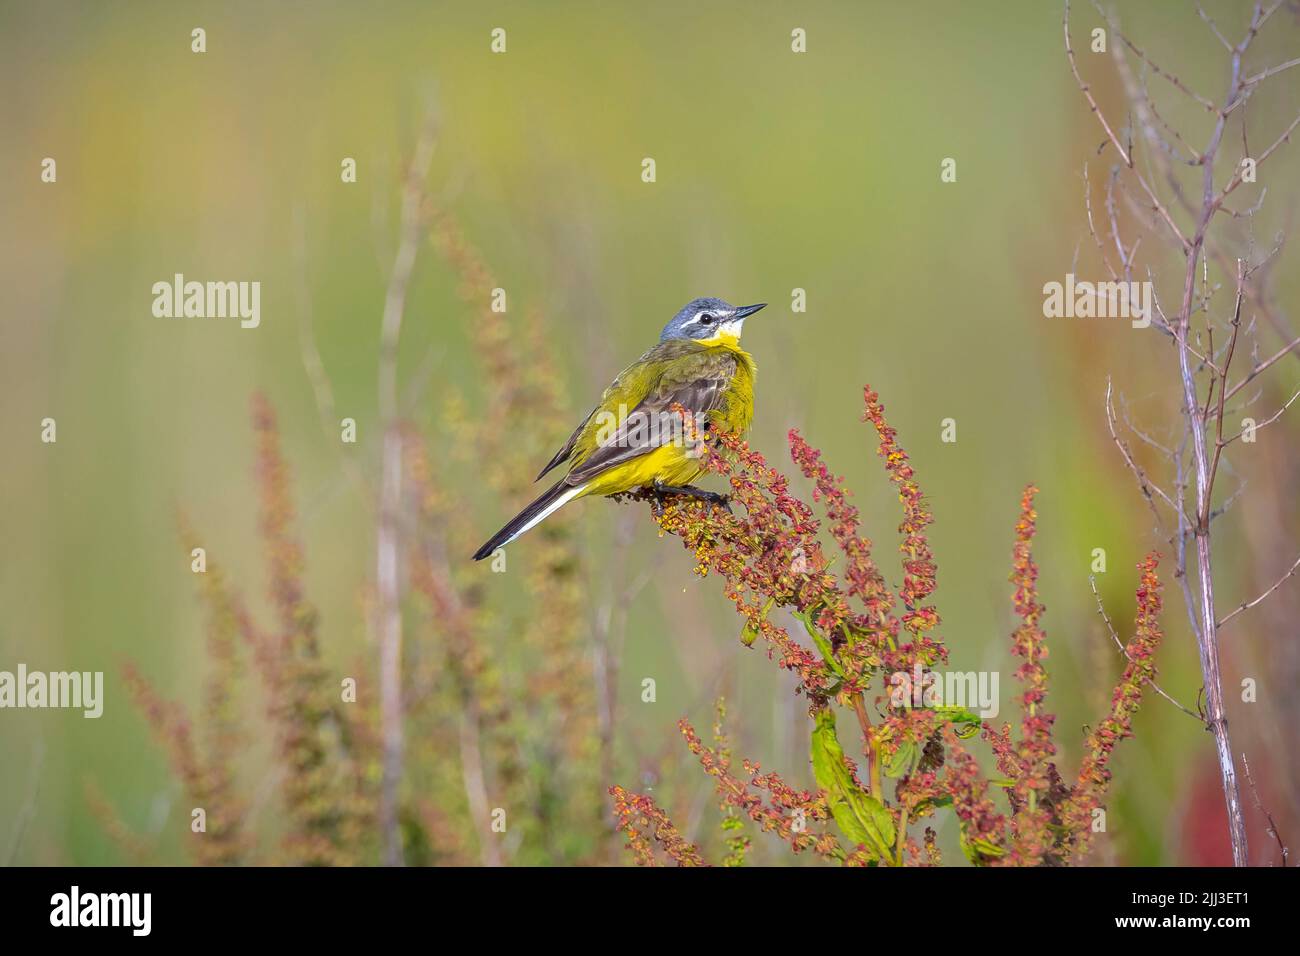 Closeup of a male western yellow wagtail bird Motacilla flava singing in vegetation on a sunny day during spring season. Stock Photo